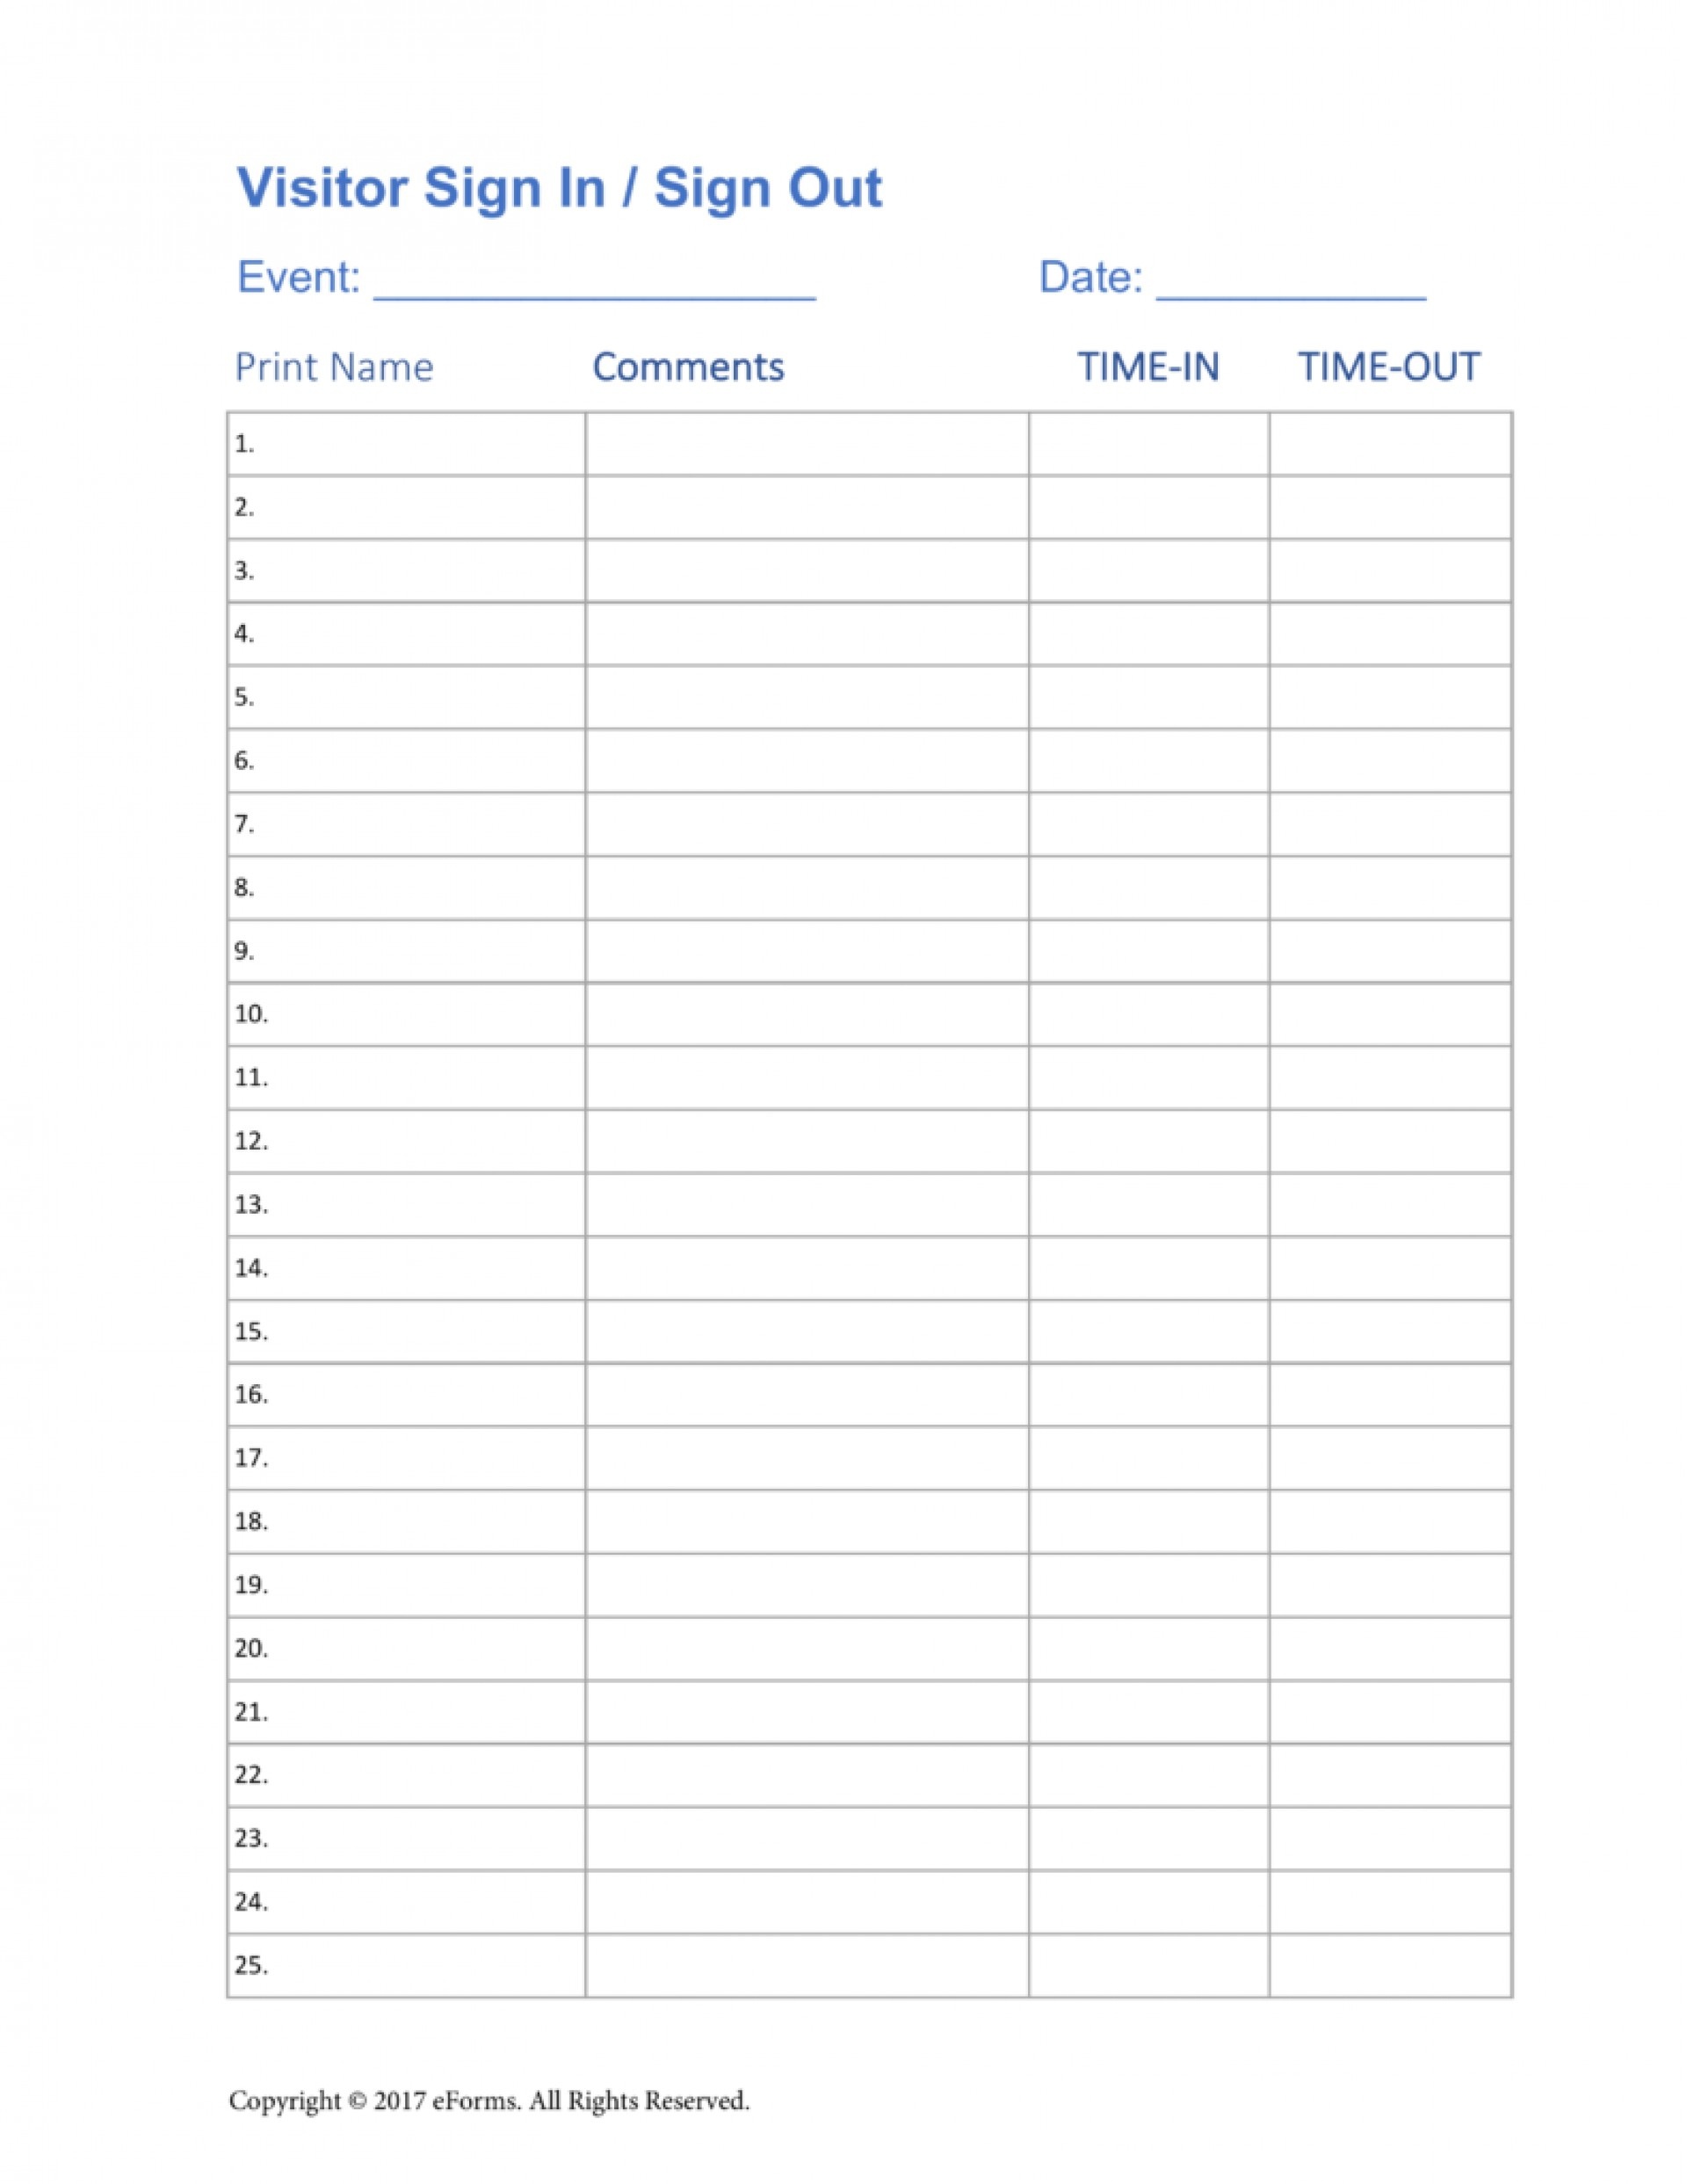 Excellent Free Signup Sheet Template Ideas Visitor Sign In Word - Free Printable Sign In Sheet